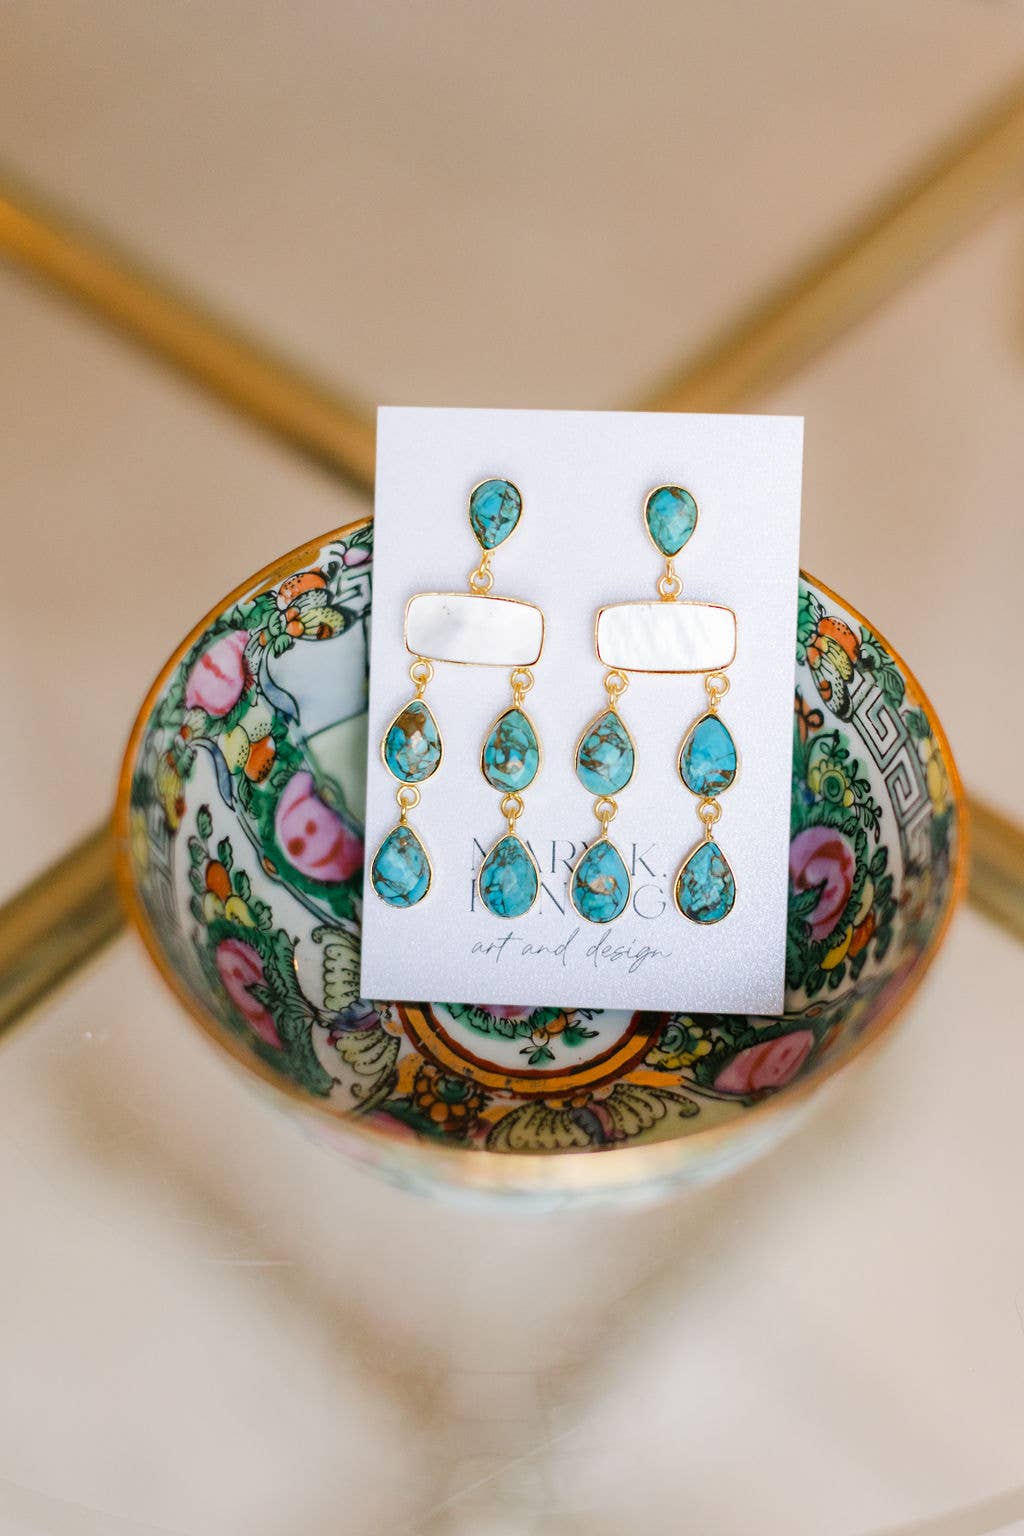 The Isabella Turquoise chandelier earring